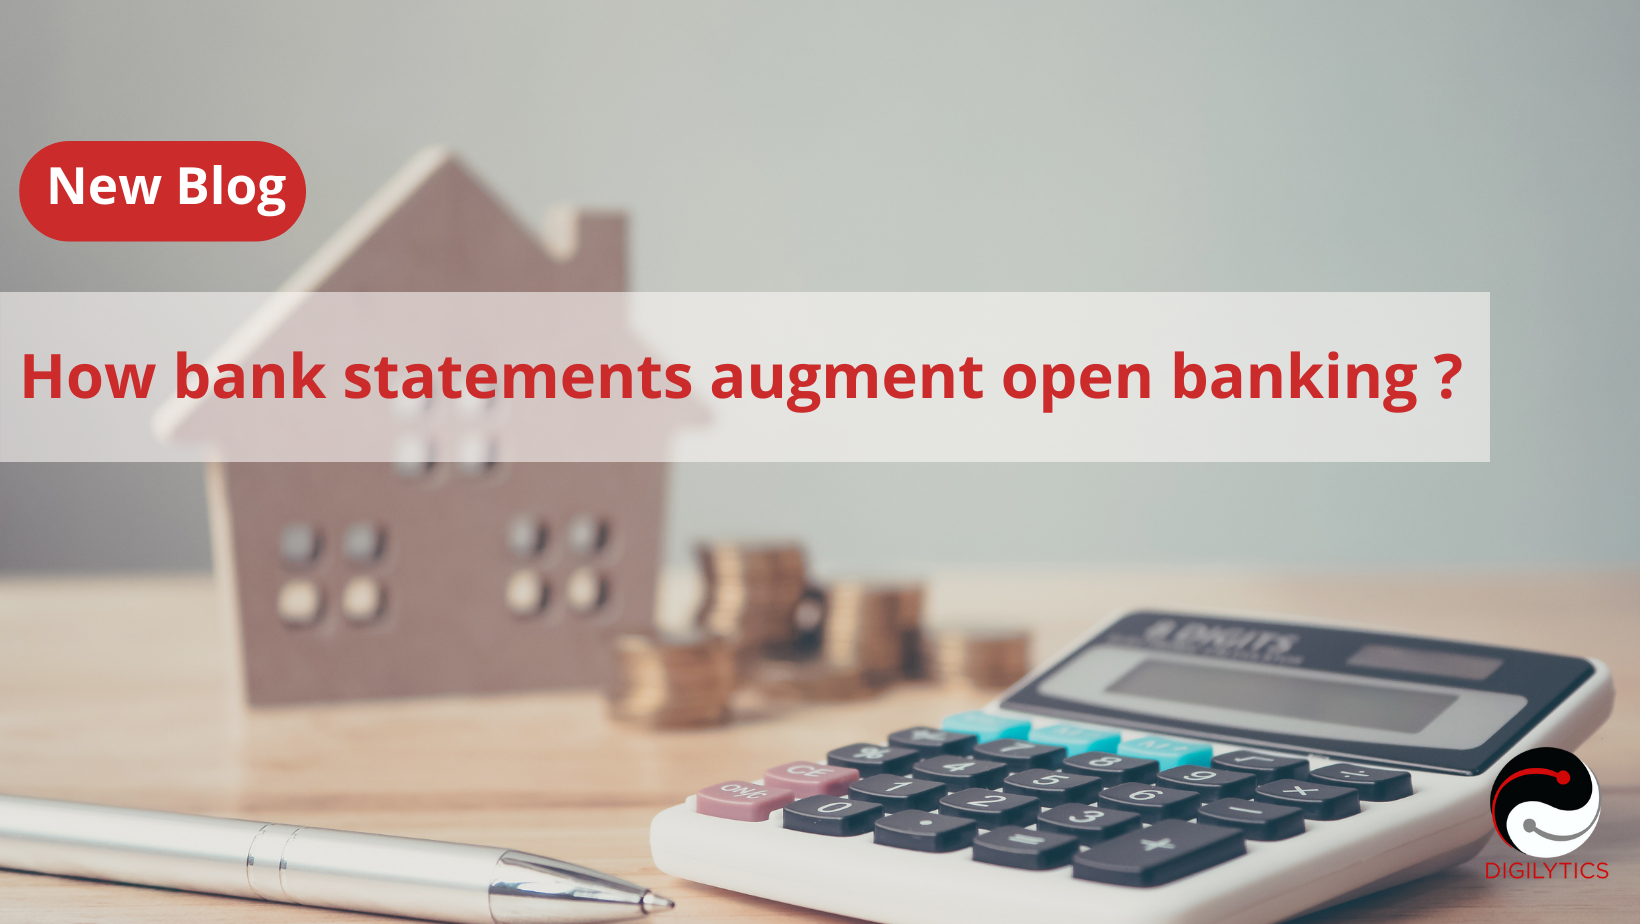 How bank statements augment open banking?